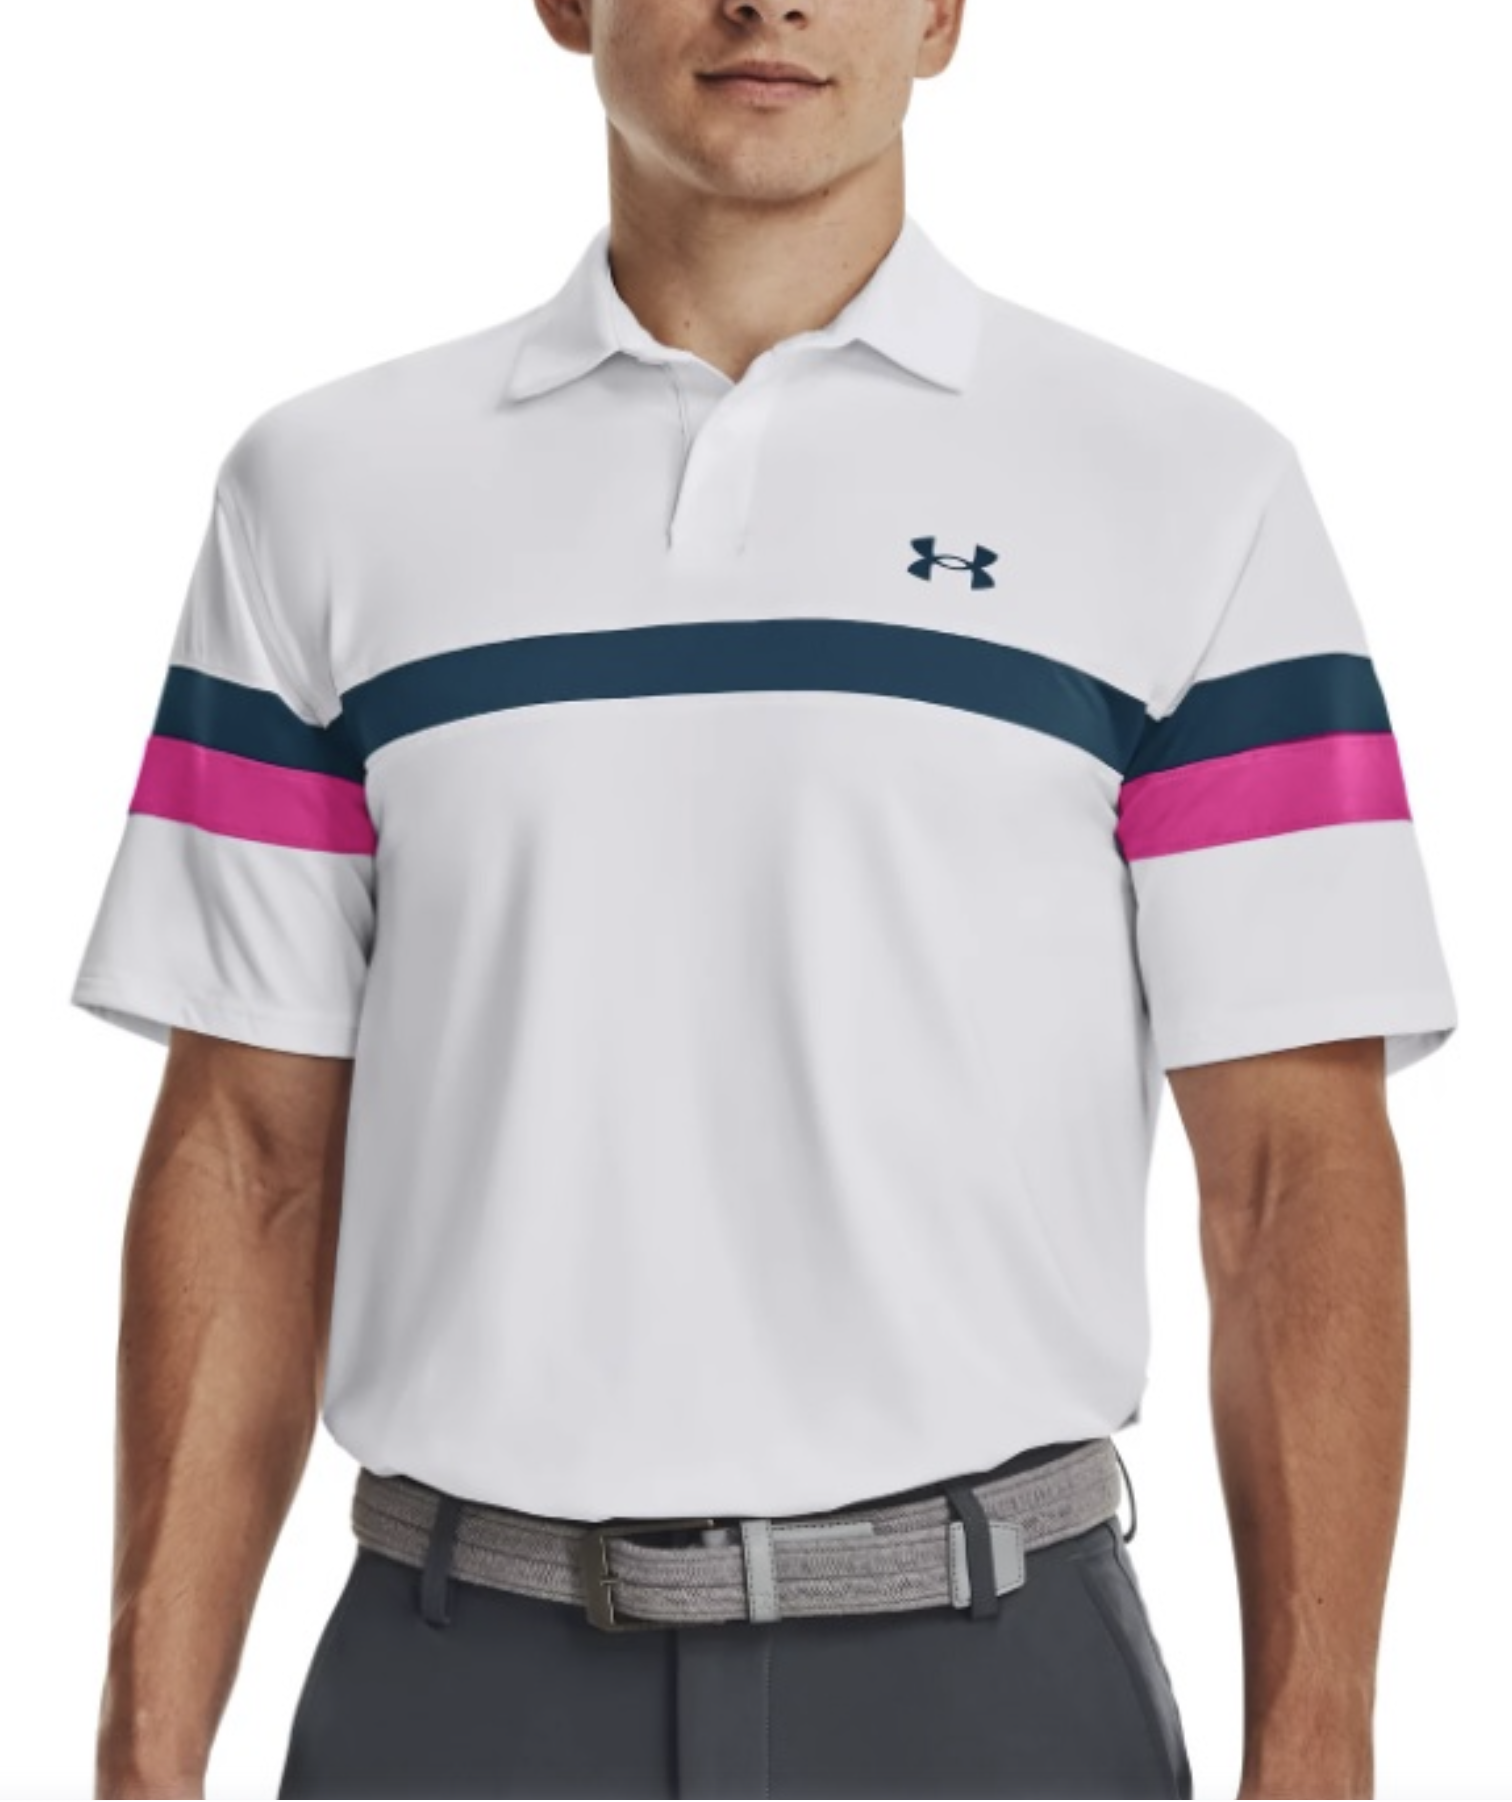 Under Armour | 1377379-100 | Blocked Polo | White / Rebel Pink / Static